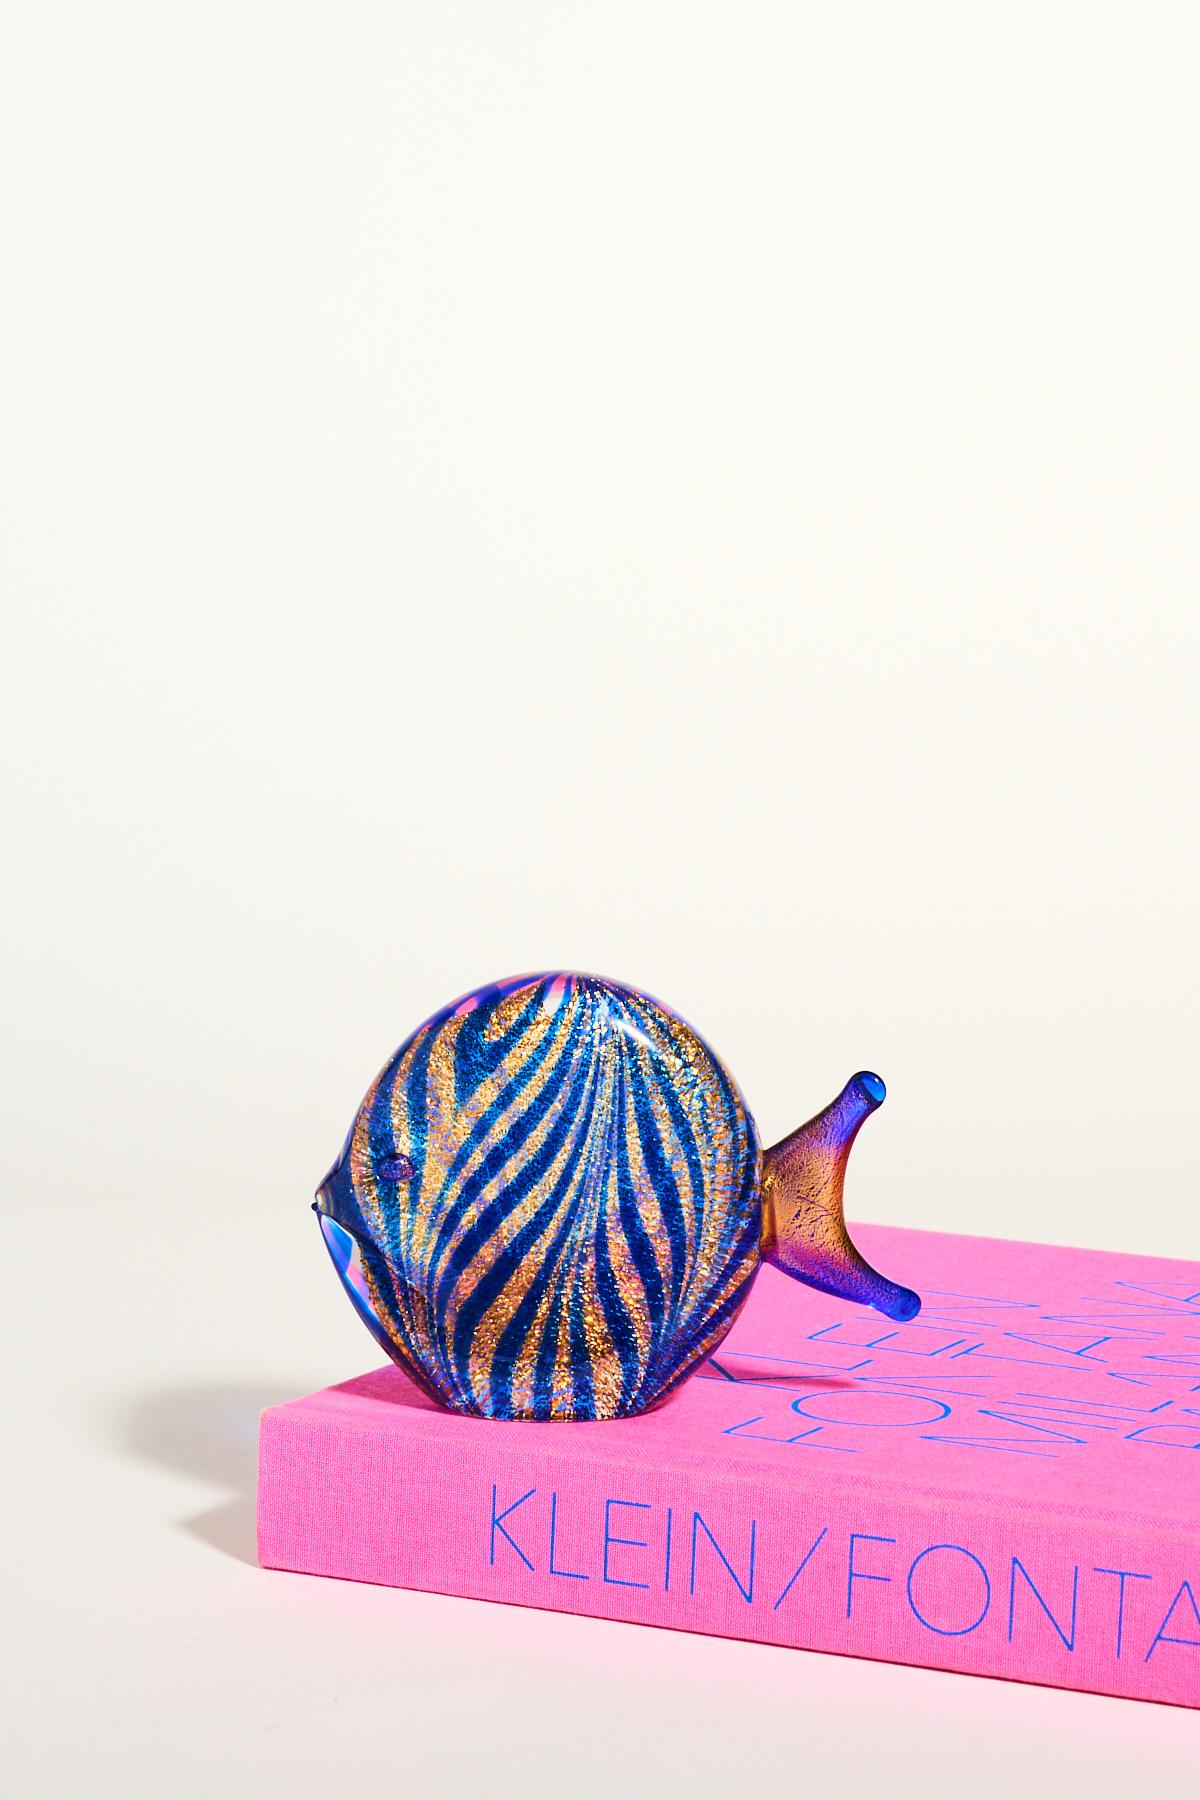 Murano glass fish in shimmering cobalt blue and gold, signed on base.